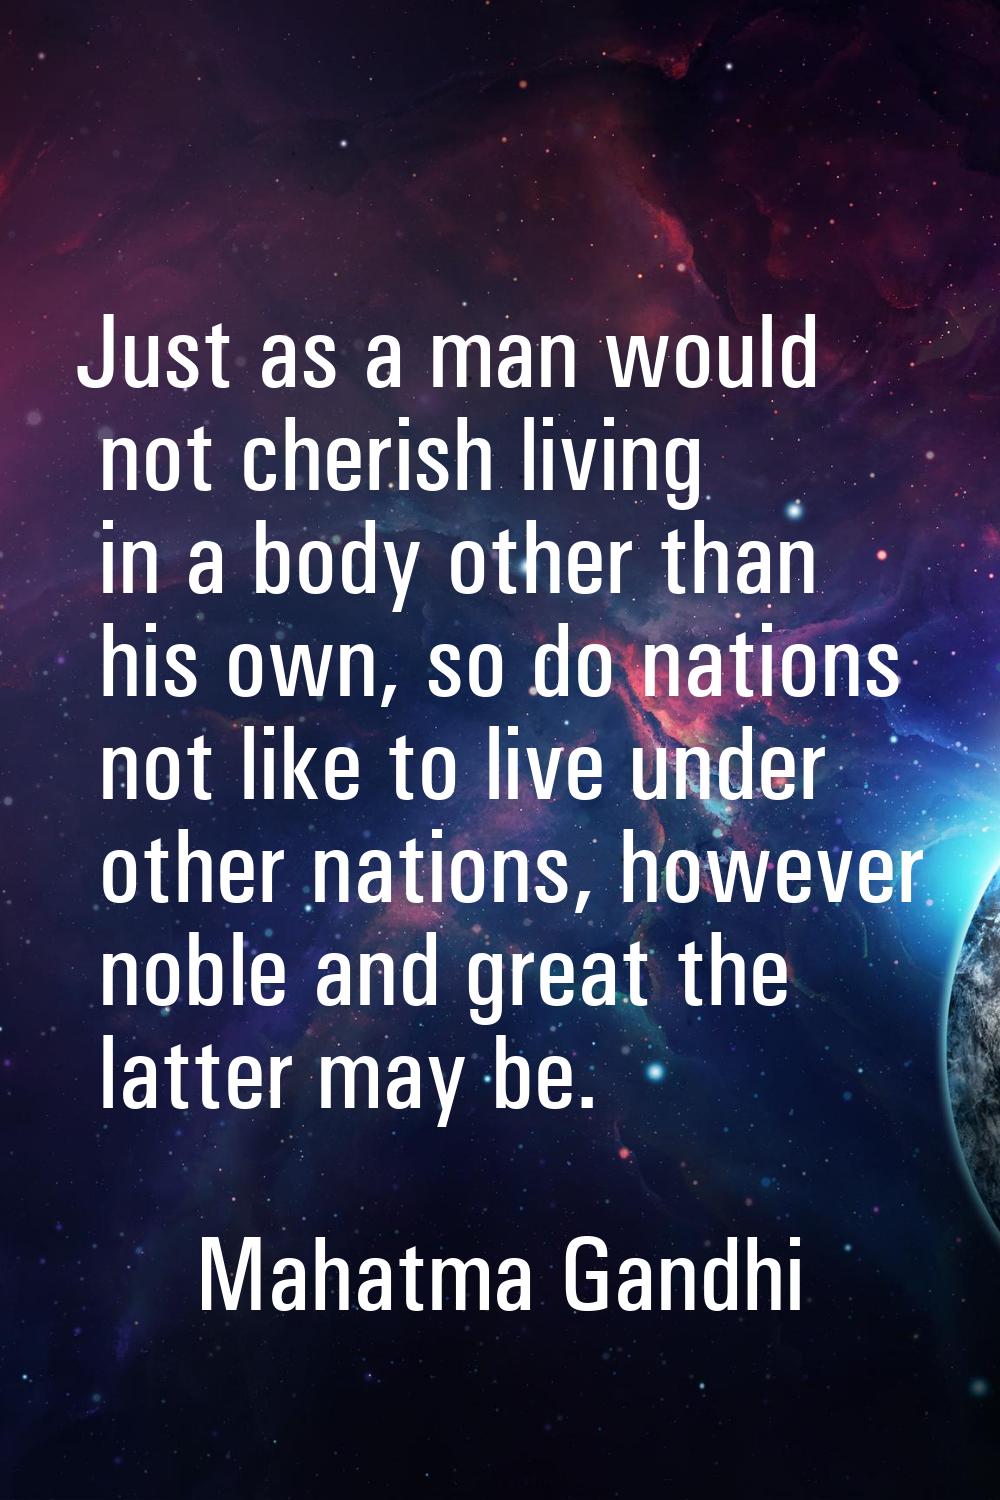 Just as a man would not cherish living in a body other than his own, so do nations not like to live